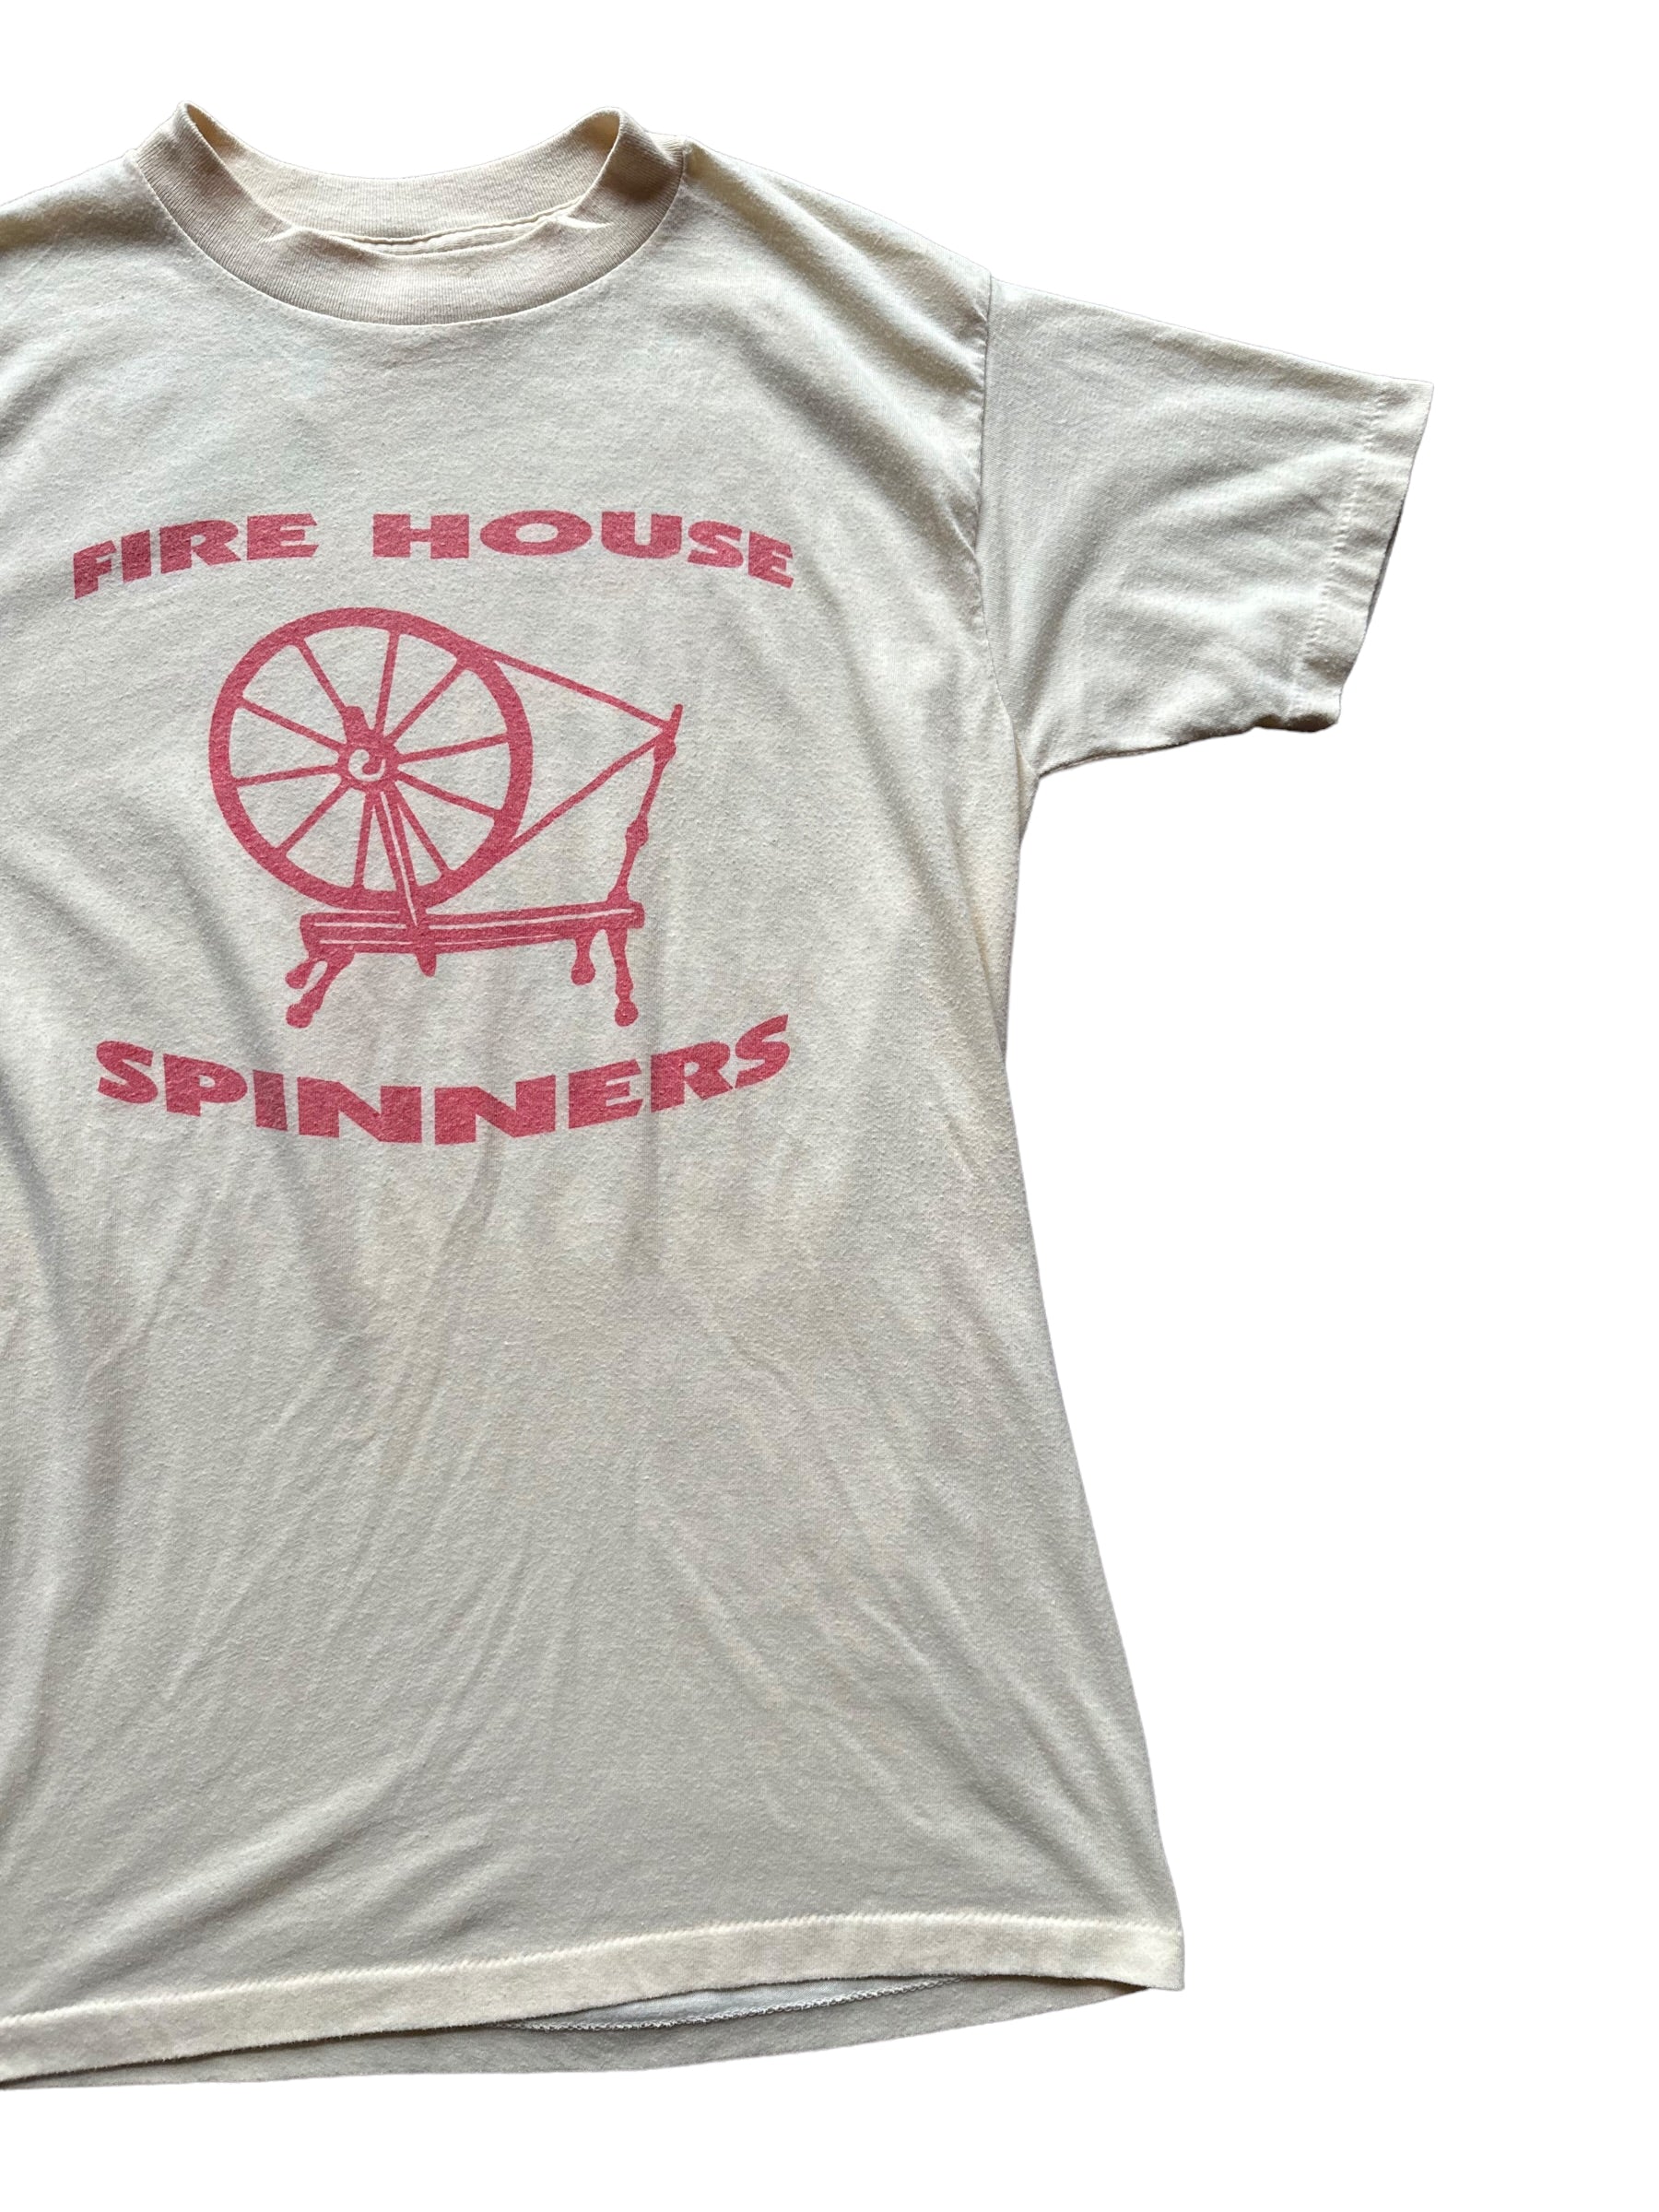 Front Left Side Close Up on Vintage Fire House Spinners Tee Size Large|  Vintage T Shirt Seattle | Barn Owl Vintage Tee